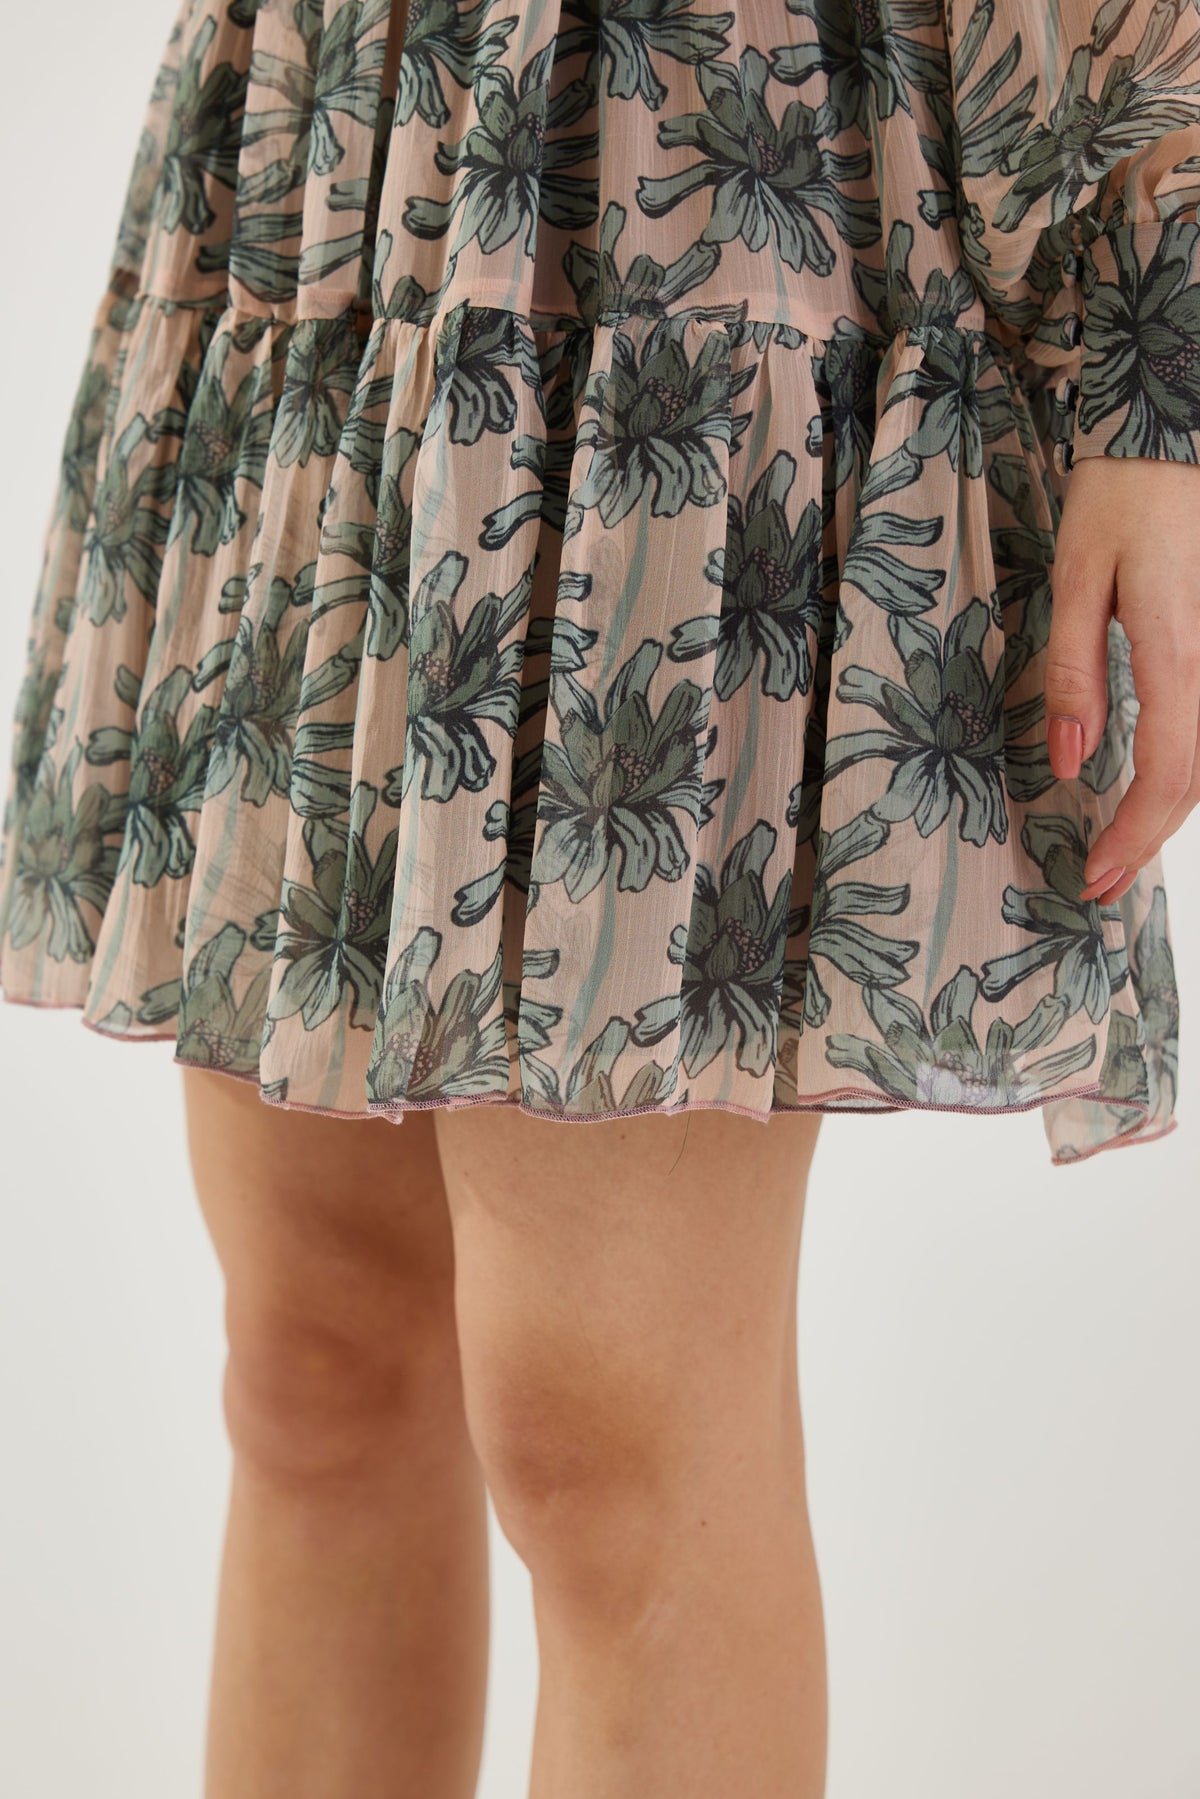 PEACH AND OLIVE FLORAL SHORT DRESS